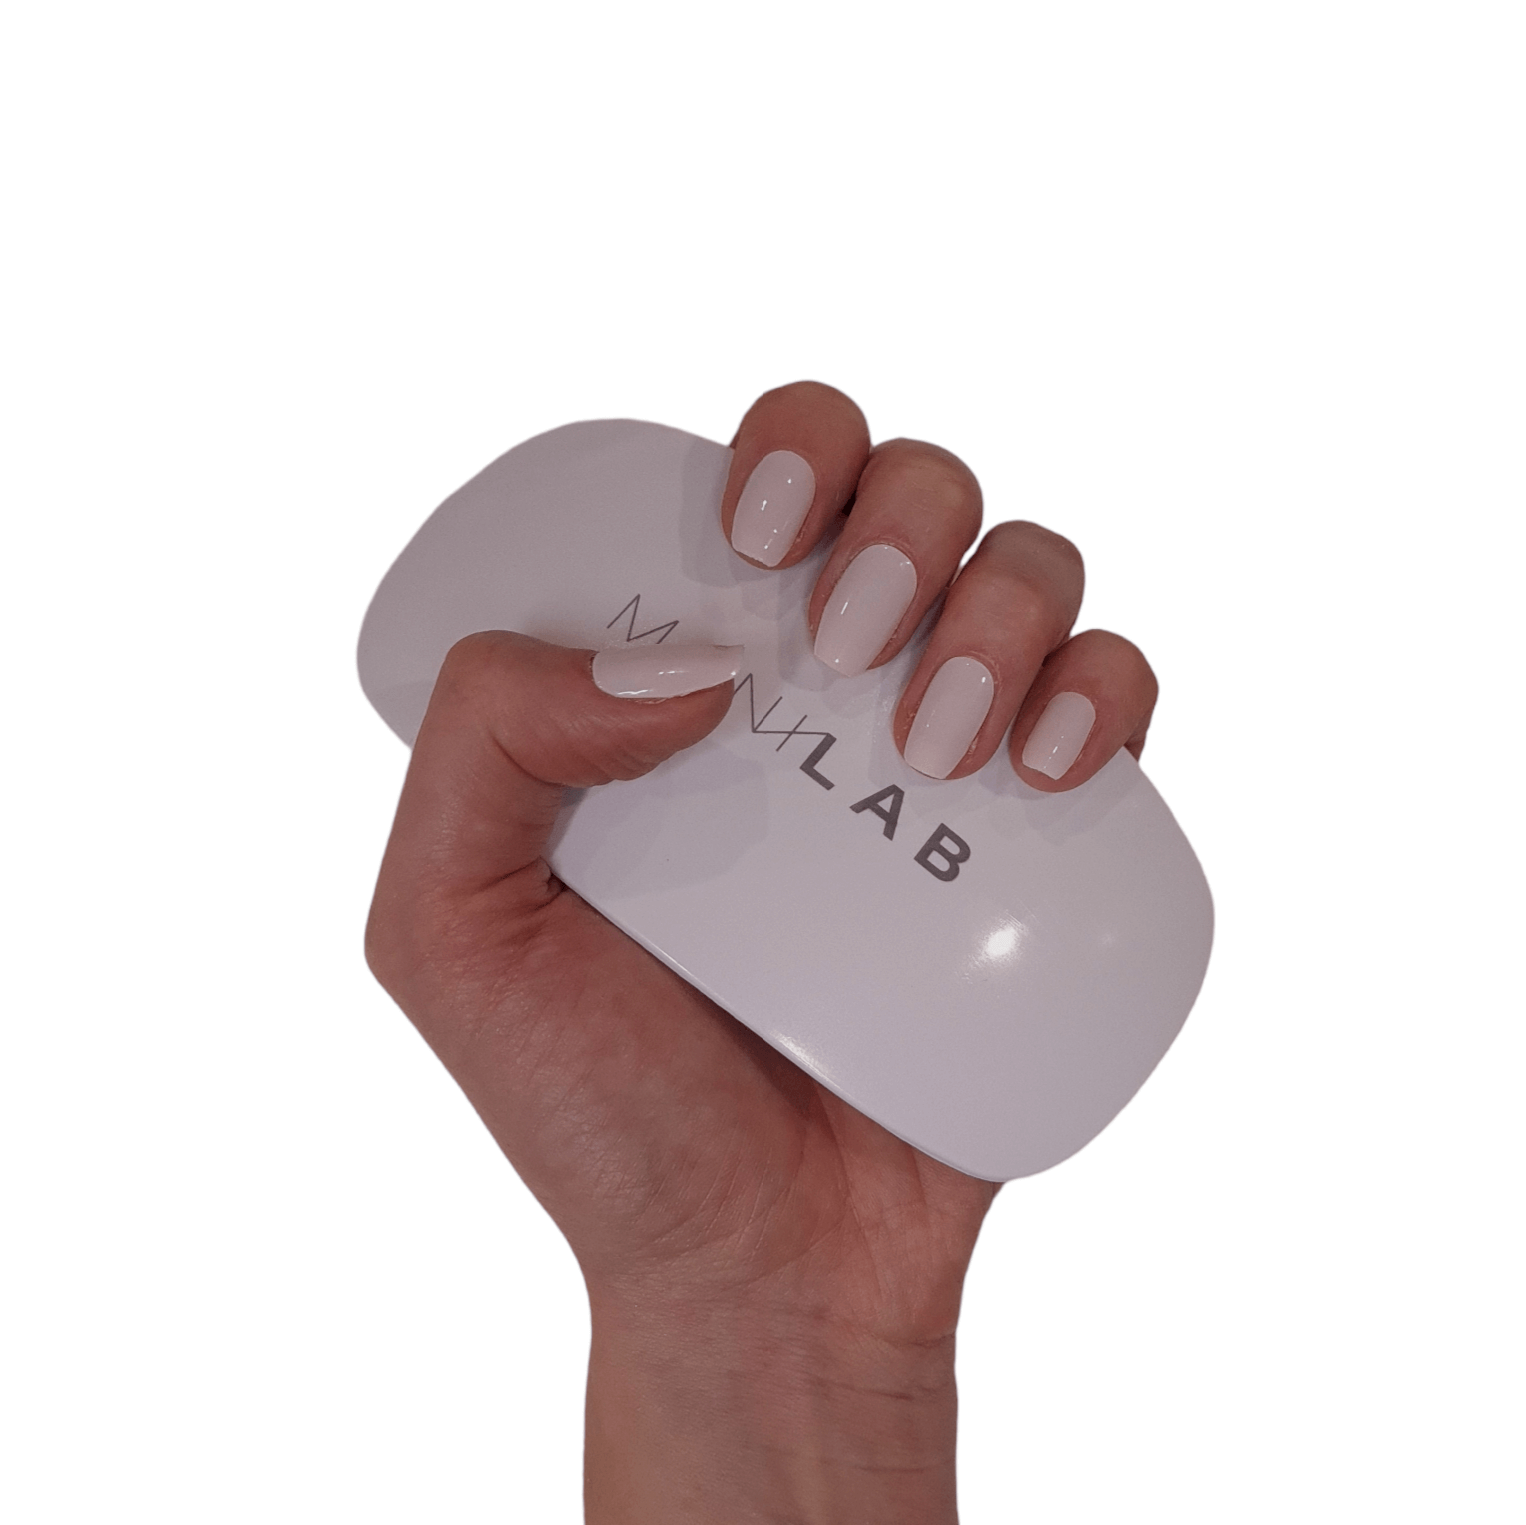 Our nude semi-cured gel nails displayed on a hand 